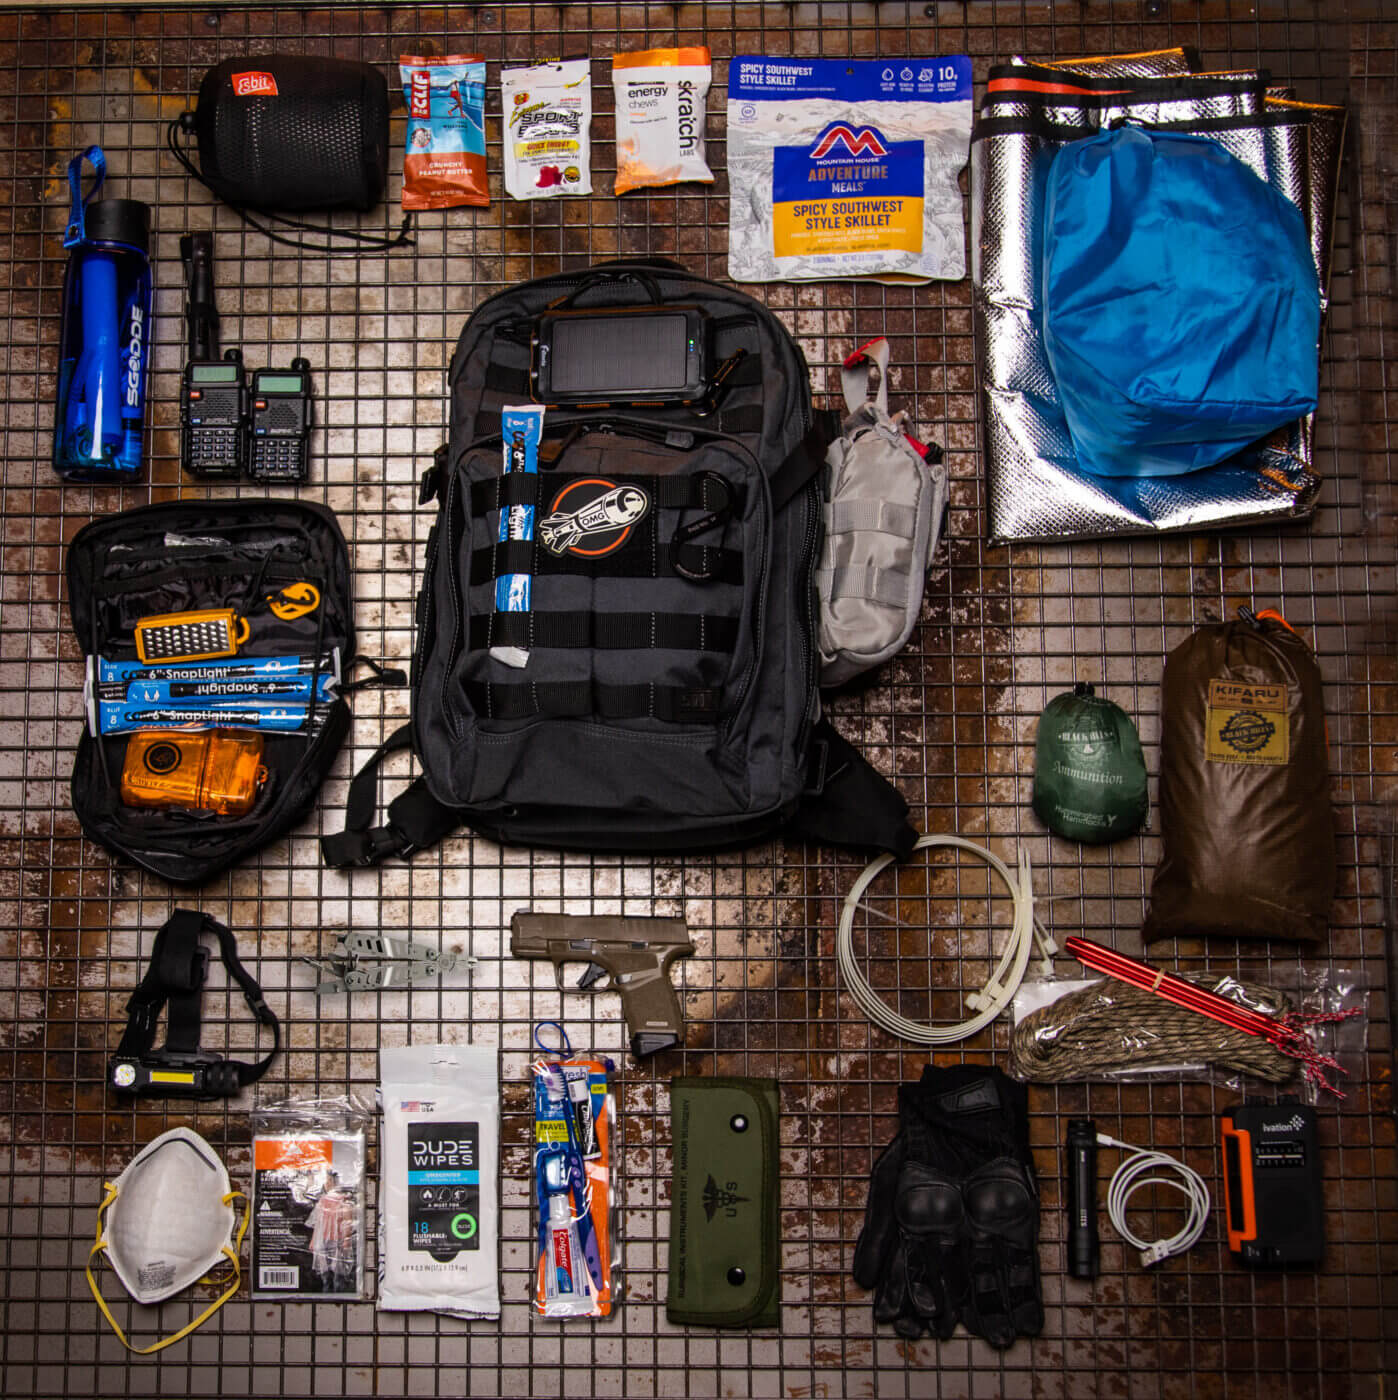 Loadout: EDC and Truck Get Home Bag